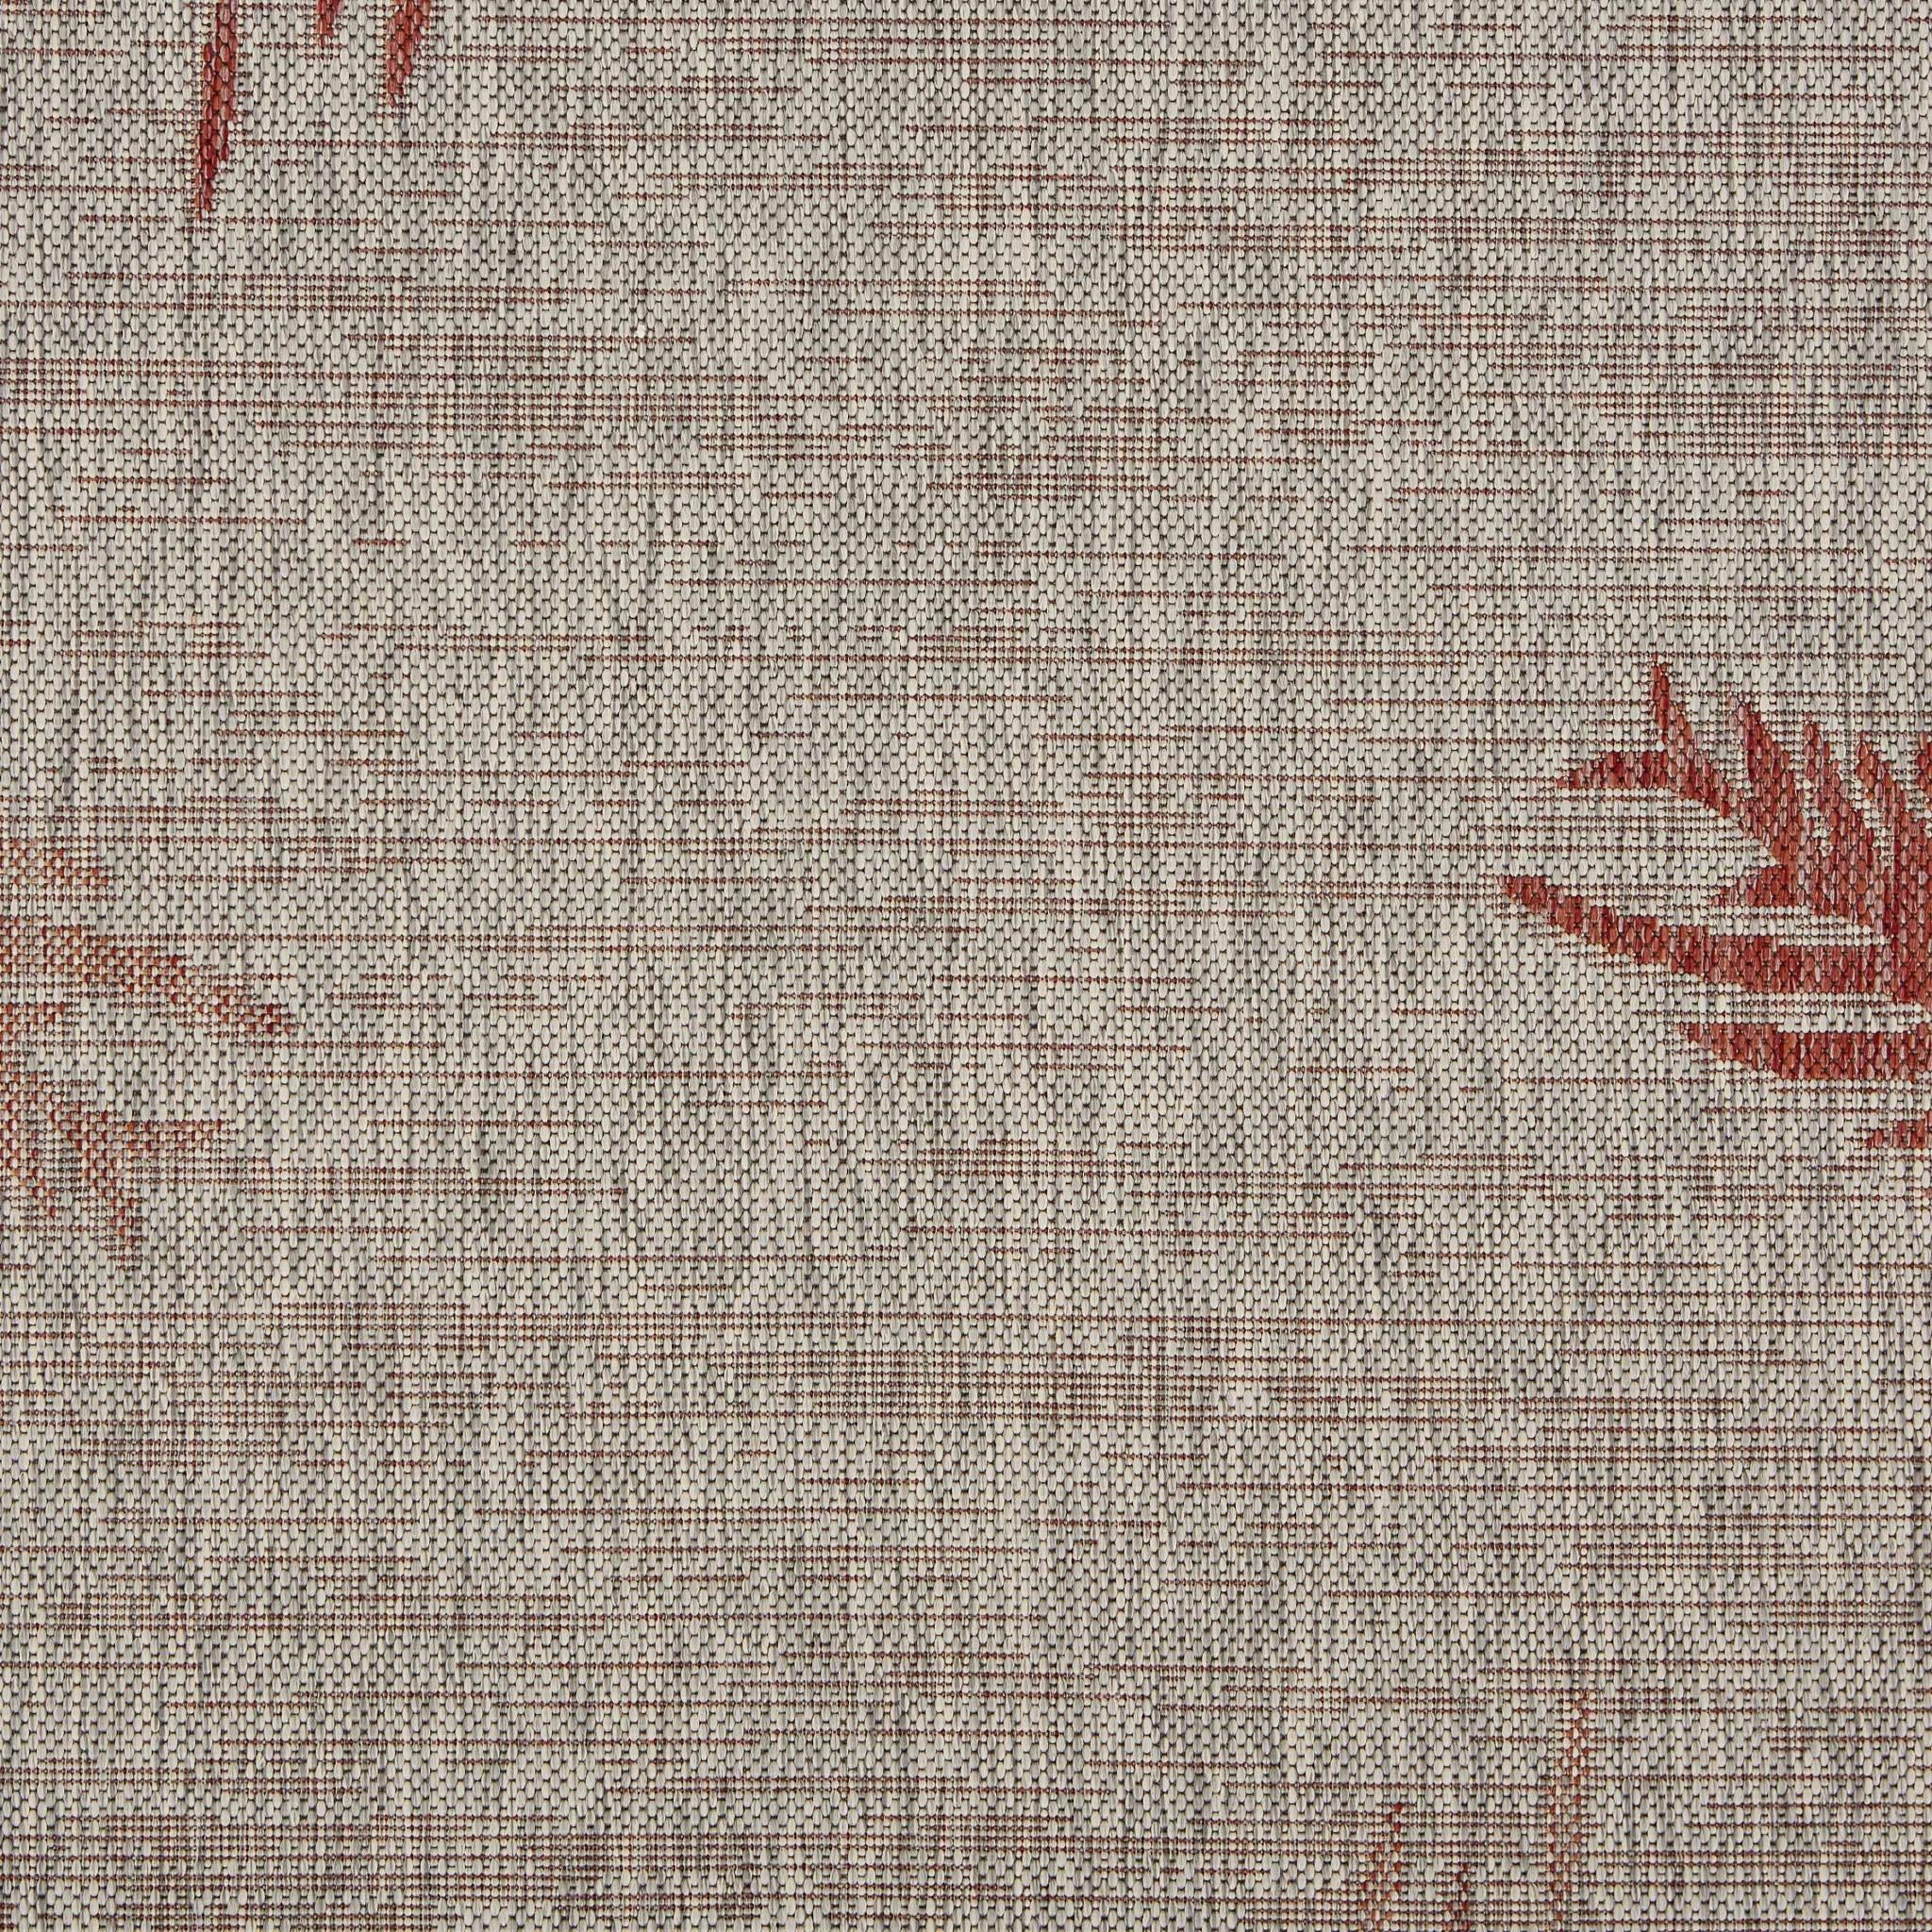 8’ x 9’ Red Palm Leaves Indoor Outdoor Area Rug